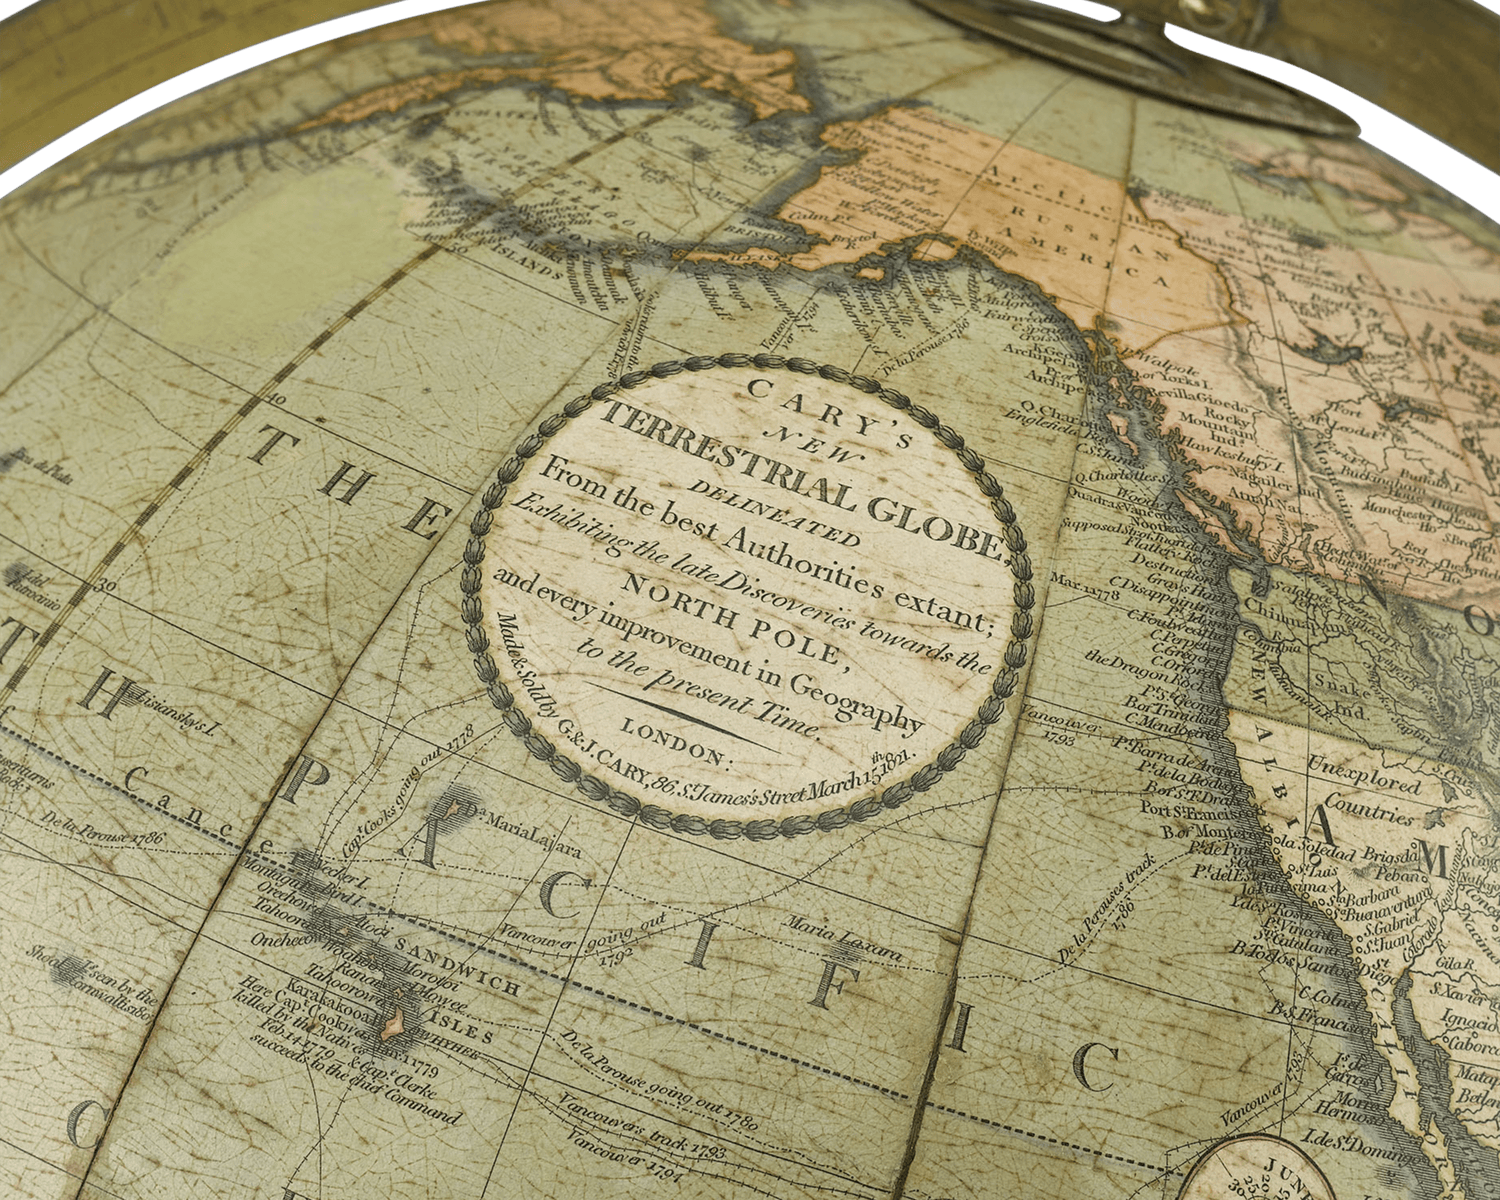 Each globe features a cartouche declaring their accuracy and date